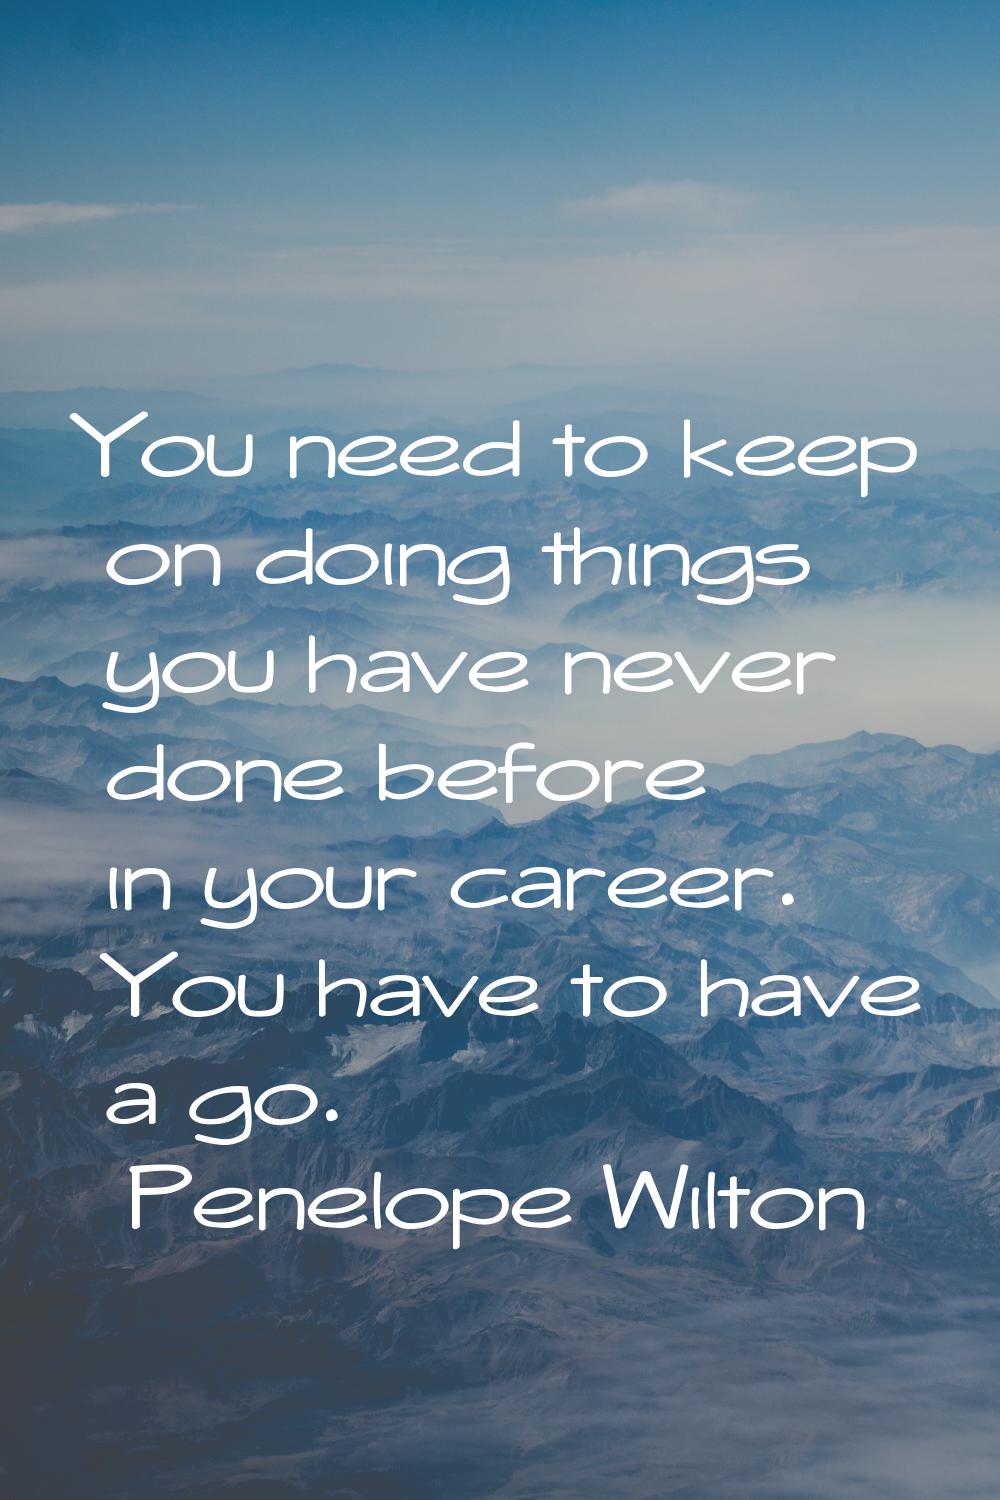 You need to keep on doing things you have never done before in your career. You have to have a go.